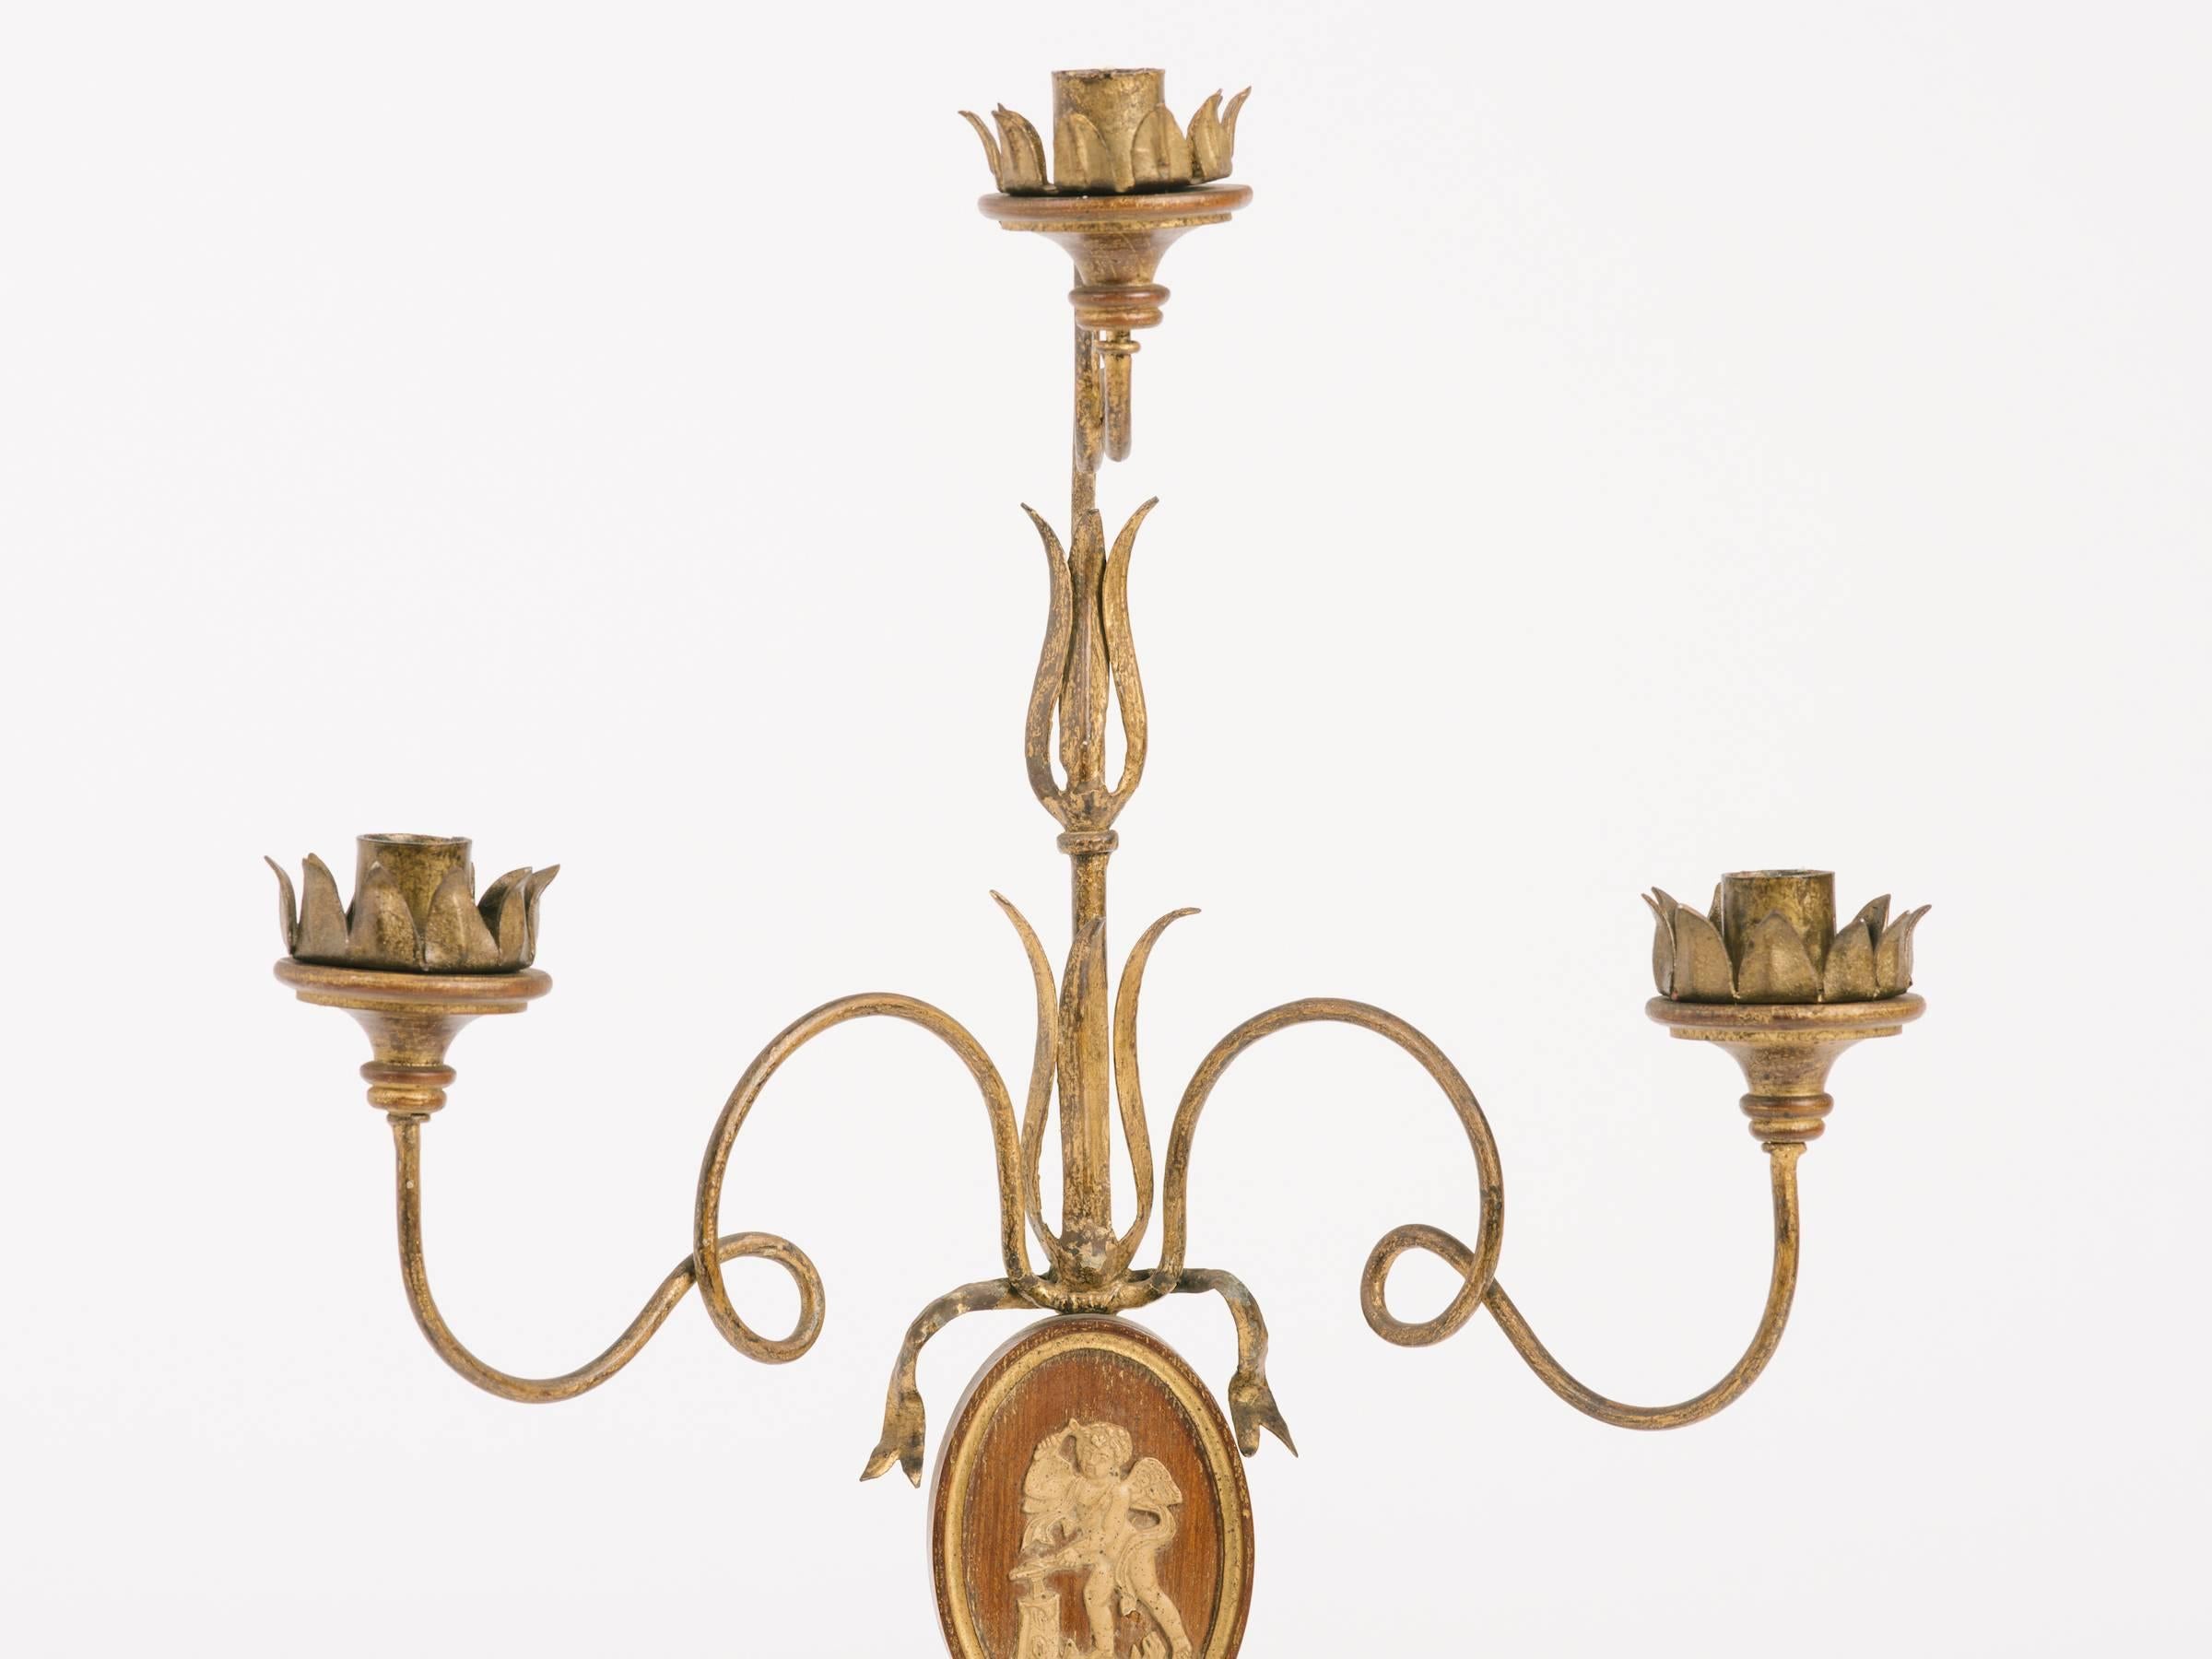 1950s Italian wood candlestick with gesso plaque of angels. Gilt metal bobeches.